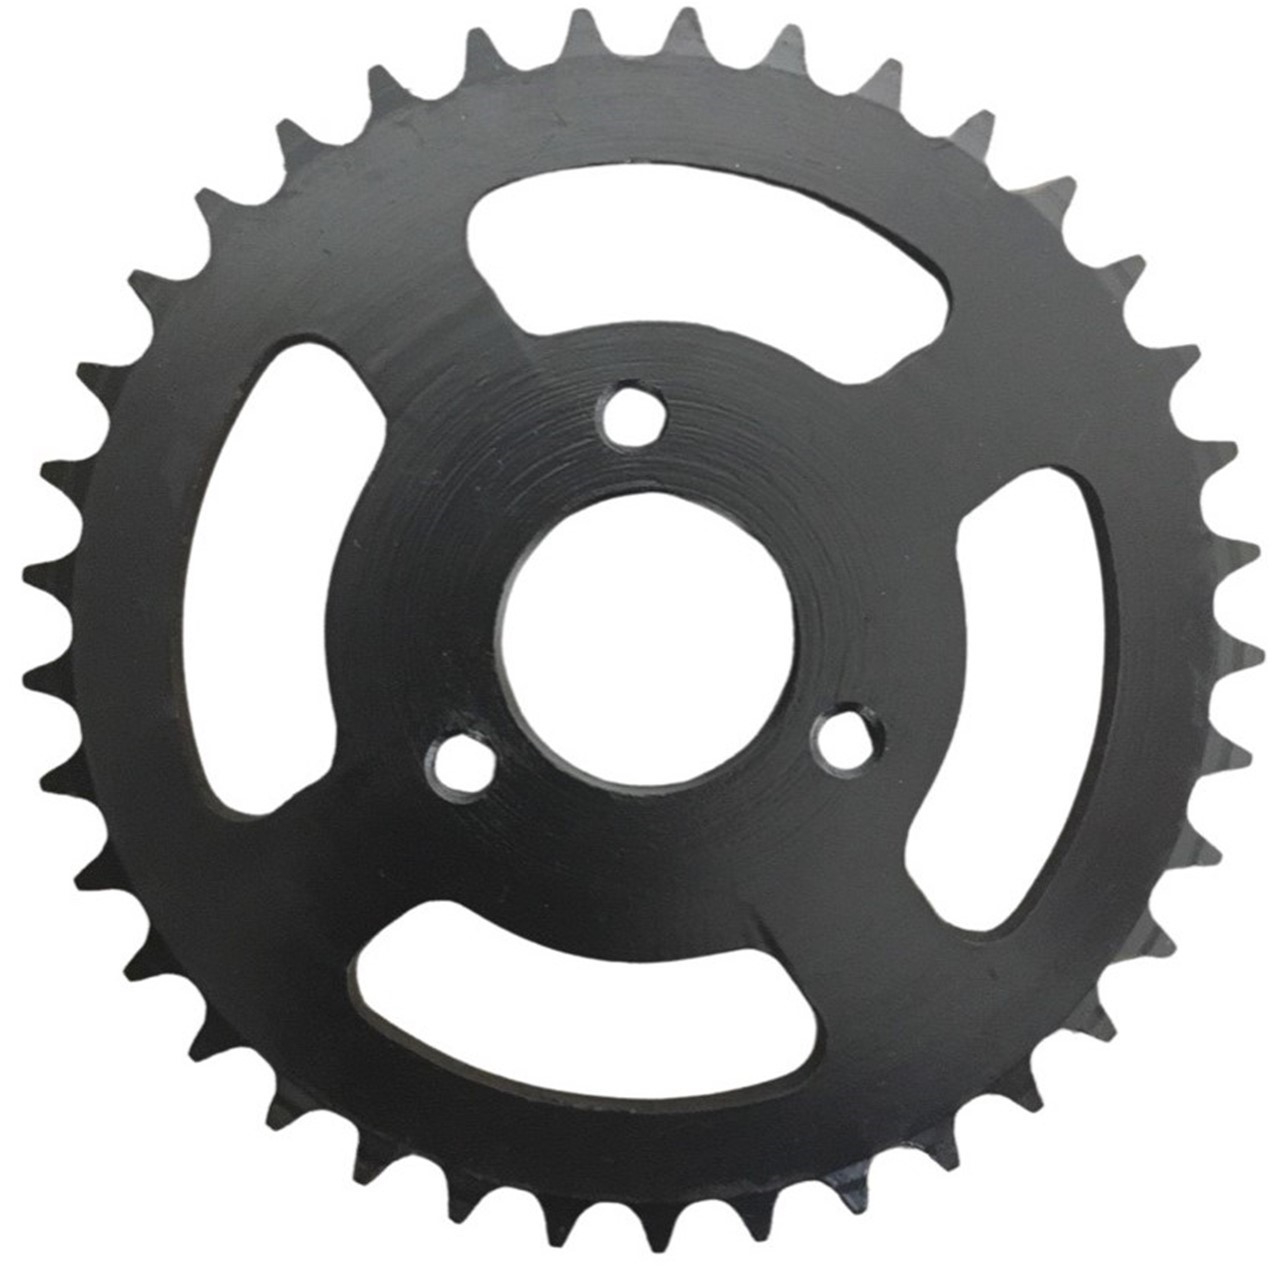 Rear Sprocket #428 37th Bolt Pattern=3x55mm (47mm to adjacent hole), Shaft=36mm - Click Image to Close